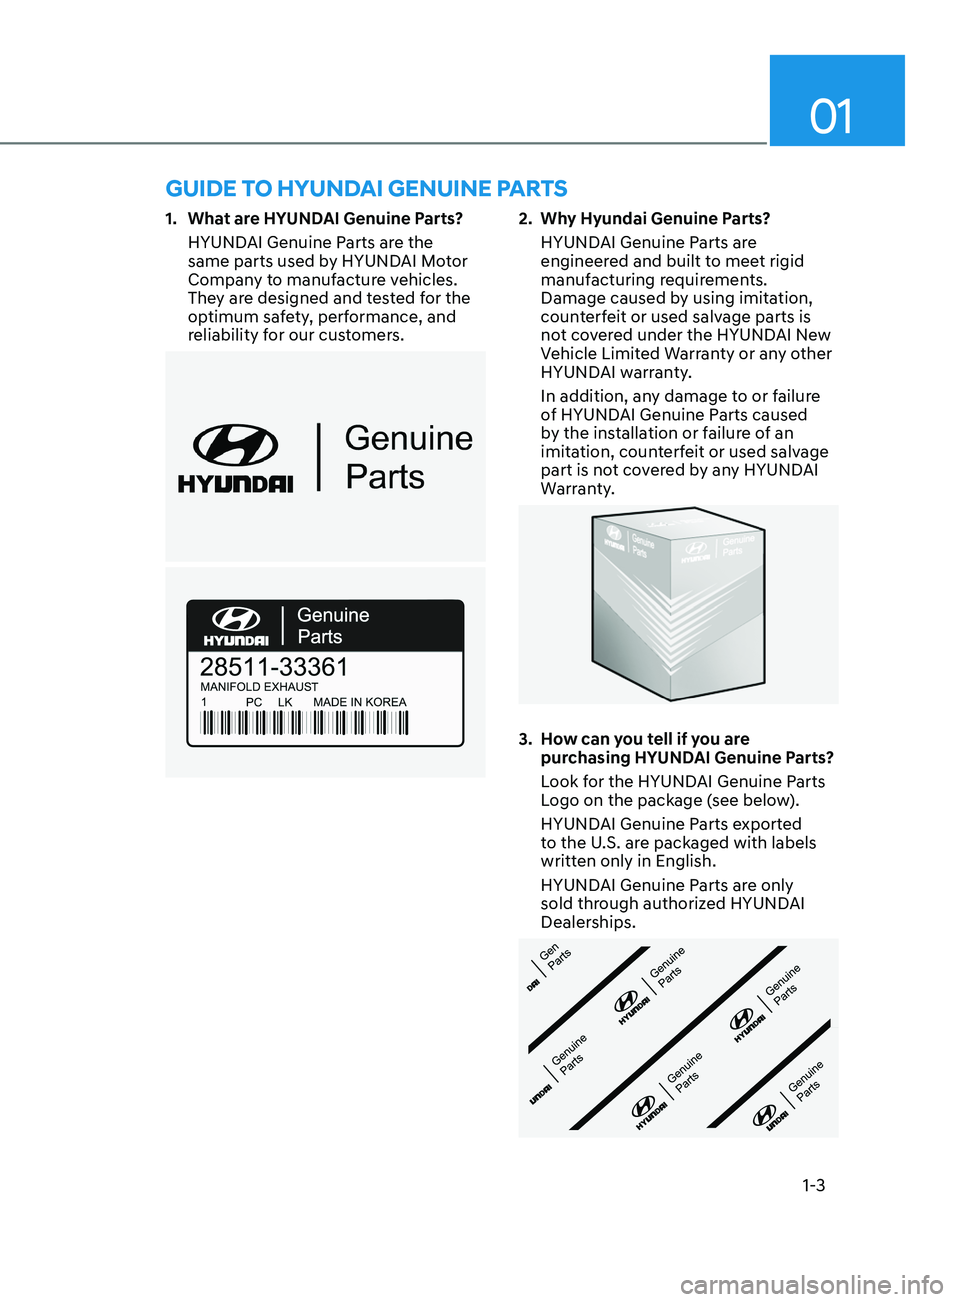 HYUNDAI SONATA 2021  Owners Manual 01
1-3
1. What are HYUNDAI Genuine Parts?HYUNDAI Genuine Parts are the 
same parts used by HYUNDAI Motor 
Company to manufacture vehicles. 
They are designed and tested for the 
optimum safety, perfor